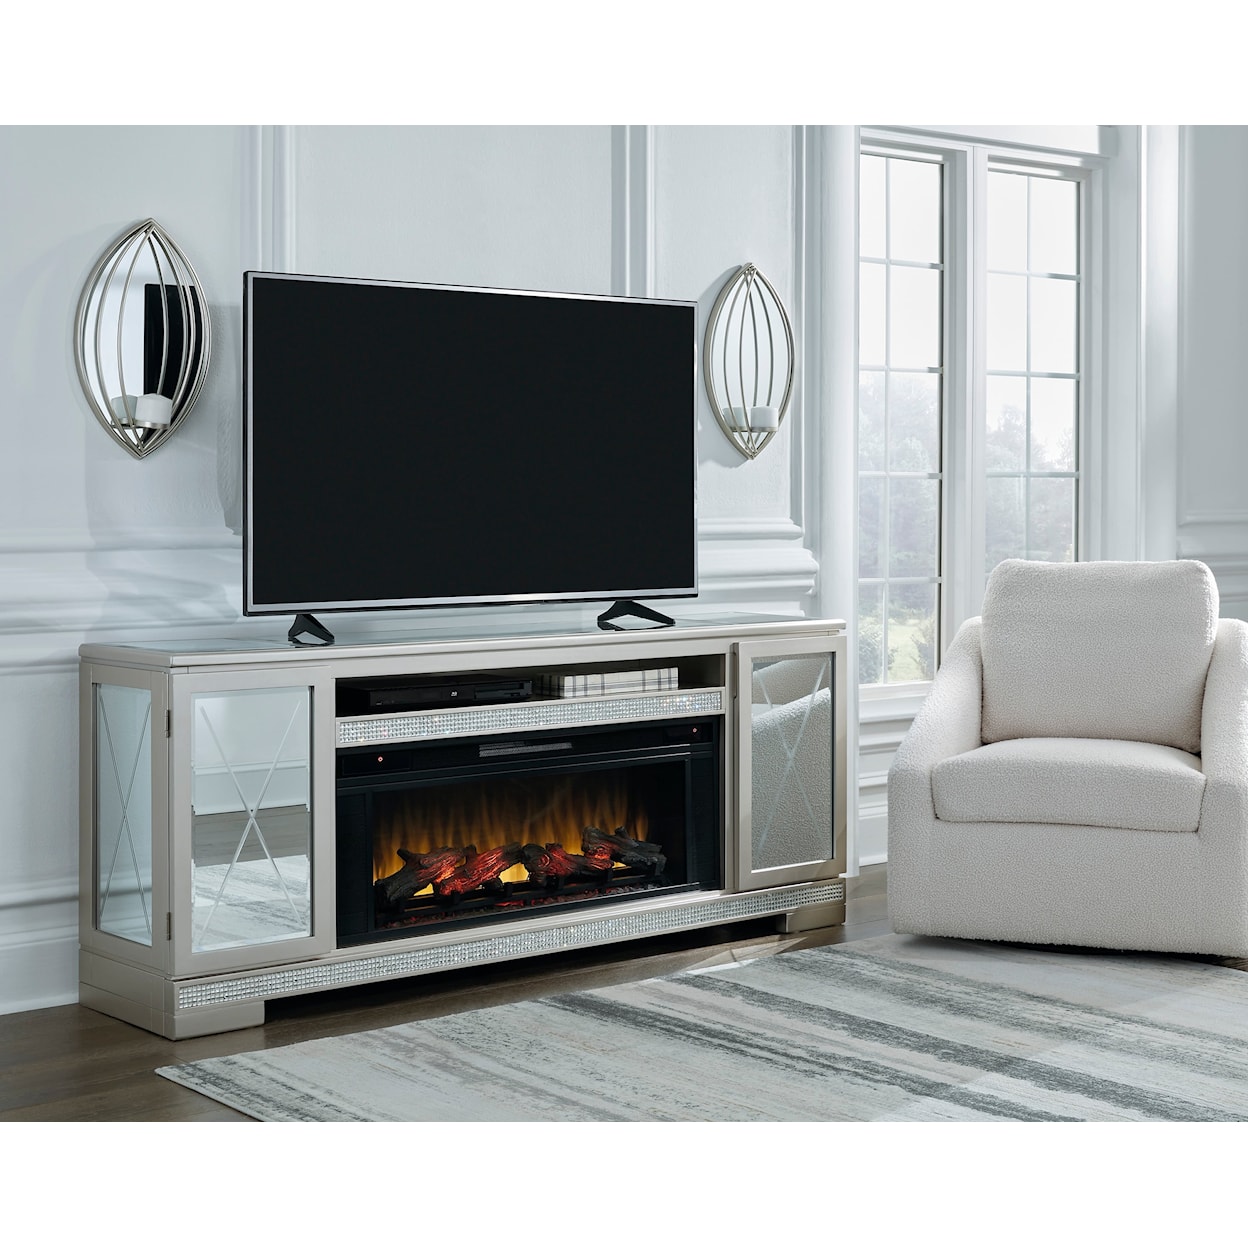 Benchcraft Flamory 72" TV Stand with Electric Fireplace